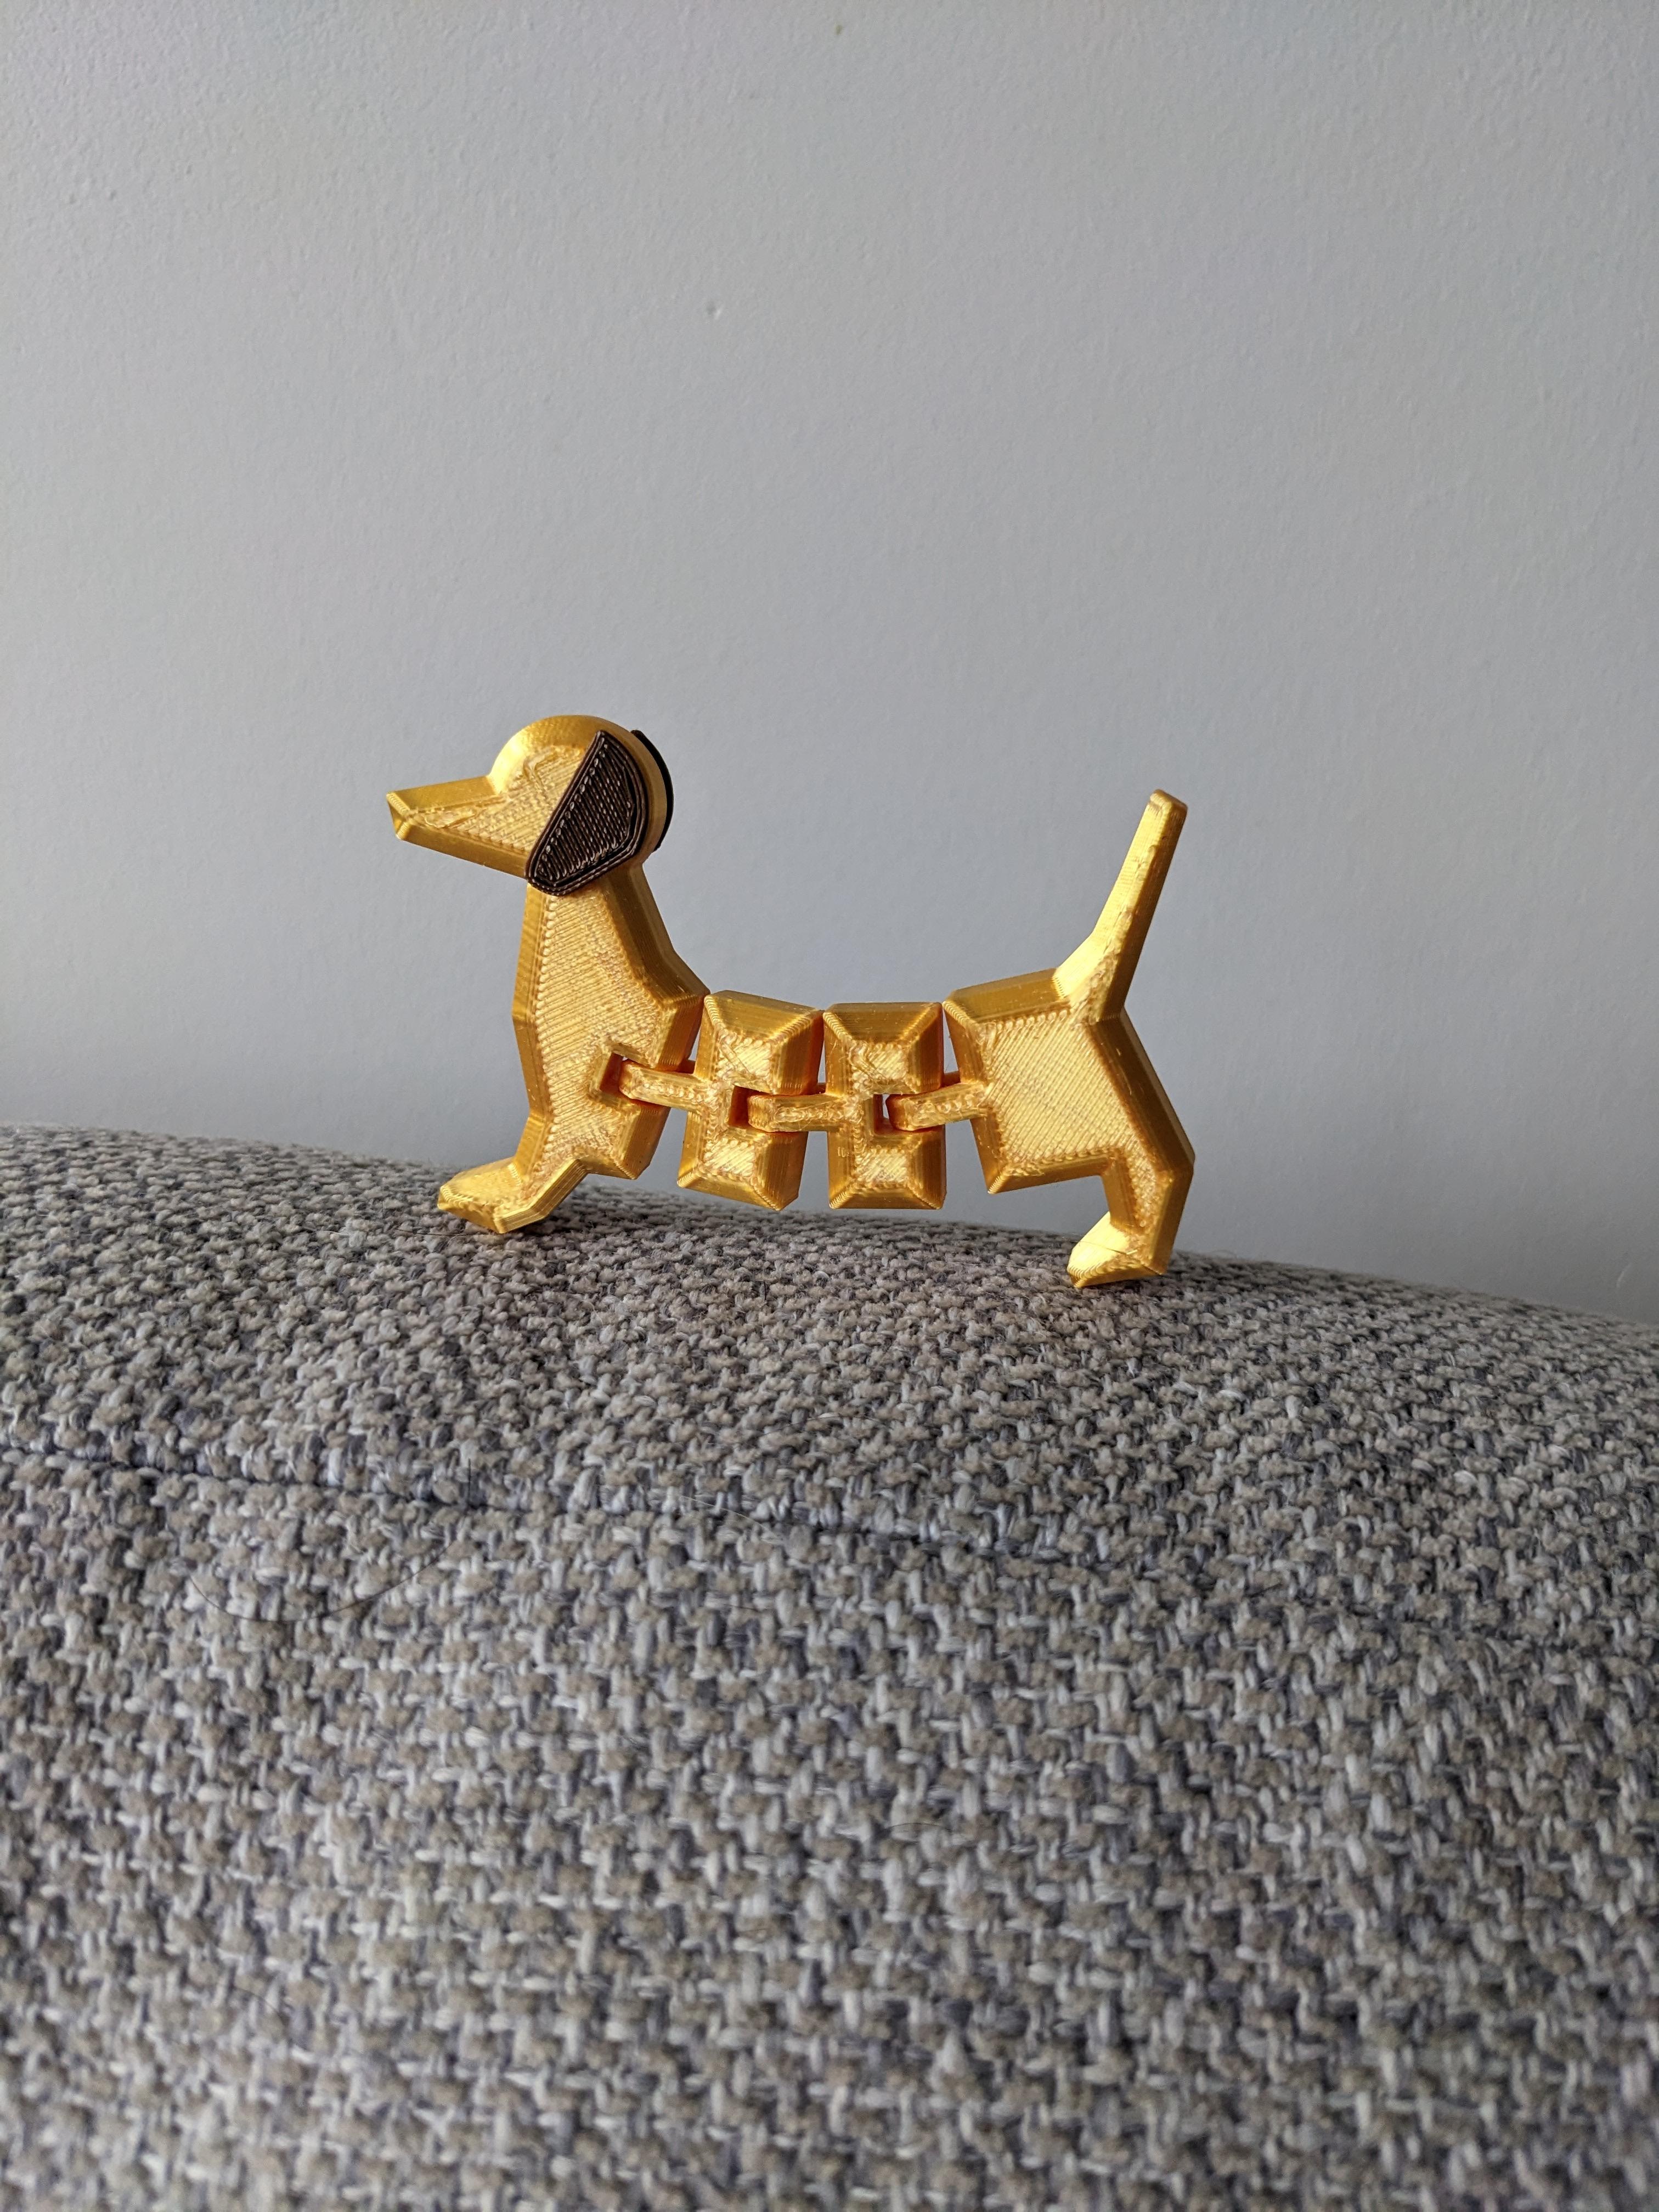 Articulated Sausage Dog - Different lengths available 3d model